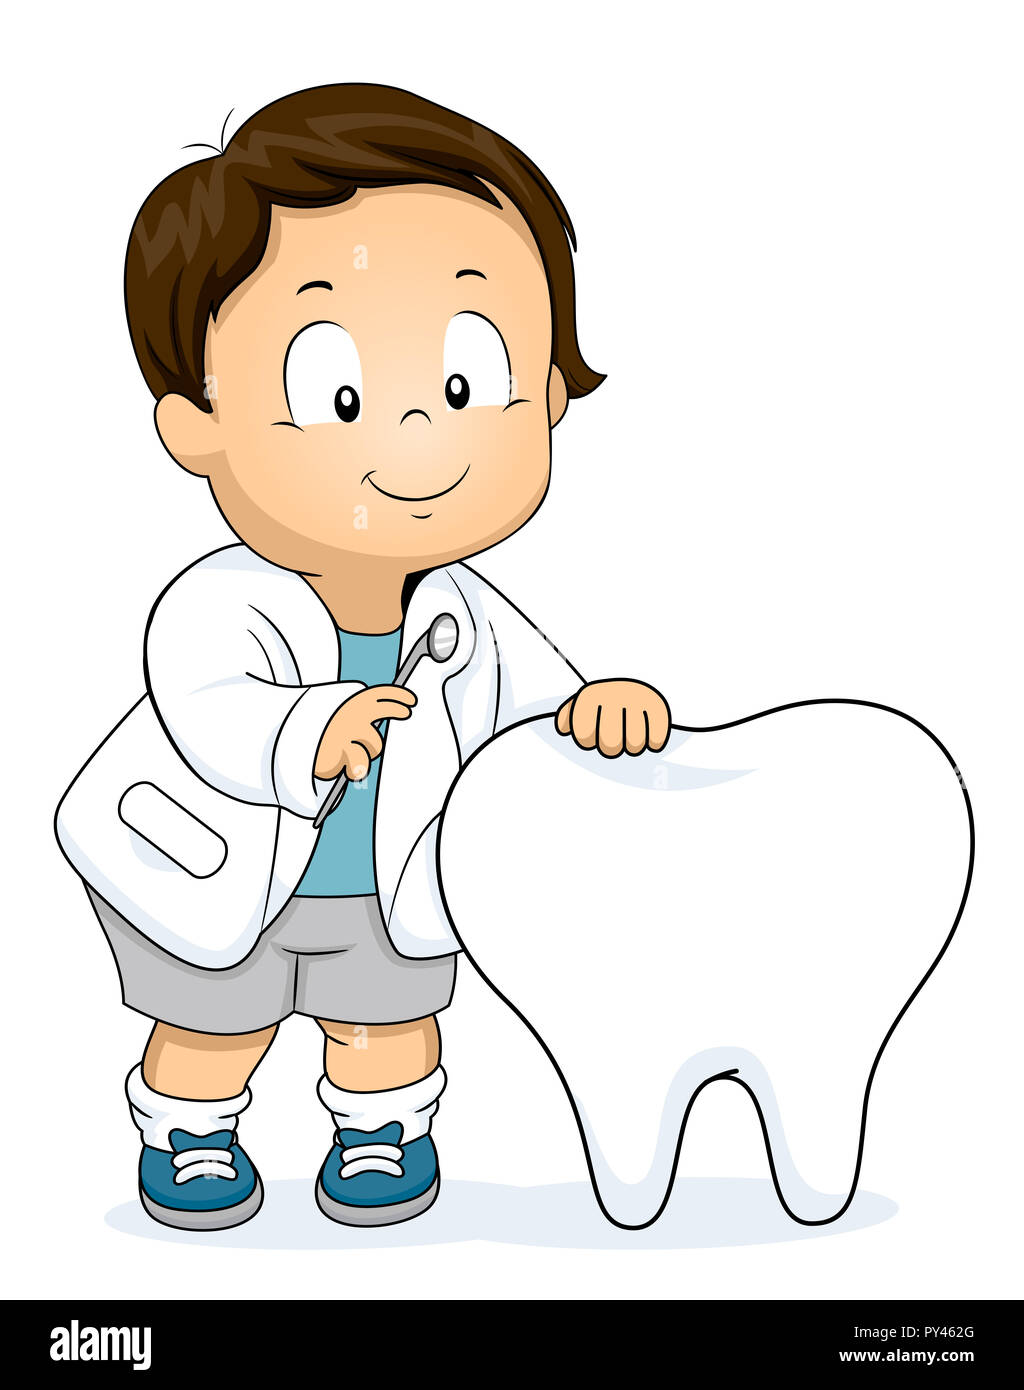 Illustration of a Kid Boy Toddler Wearing Dentist White Coat Holding a Big Tooth and Dental Mirror Stock Photo